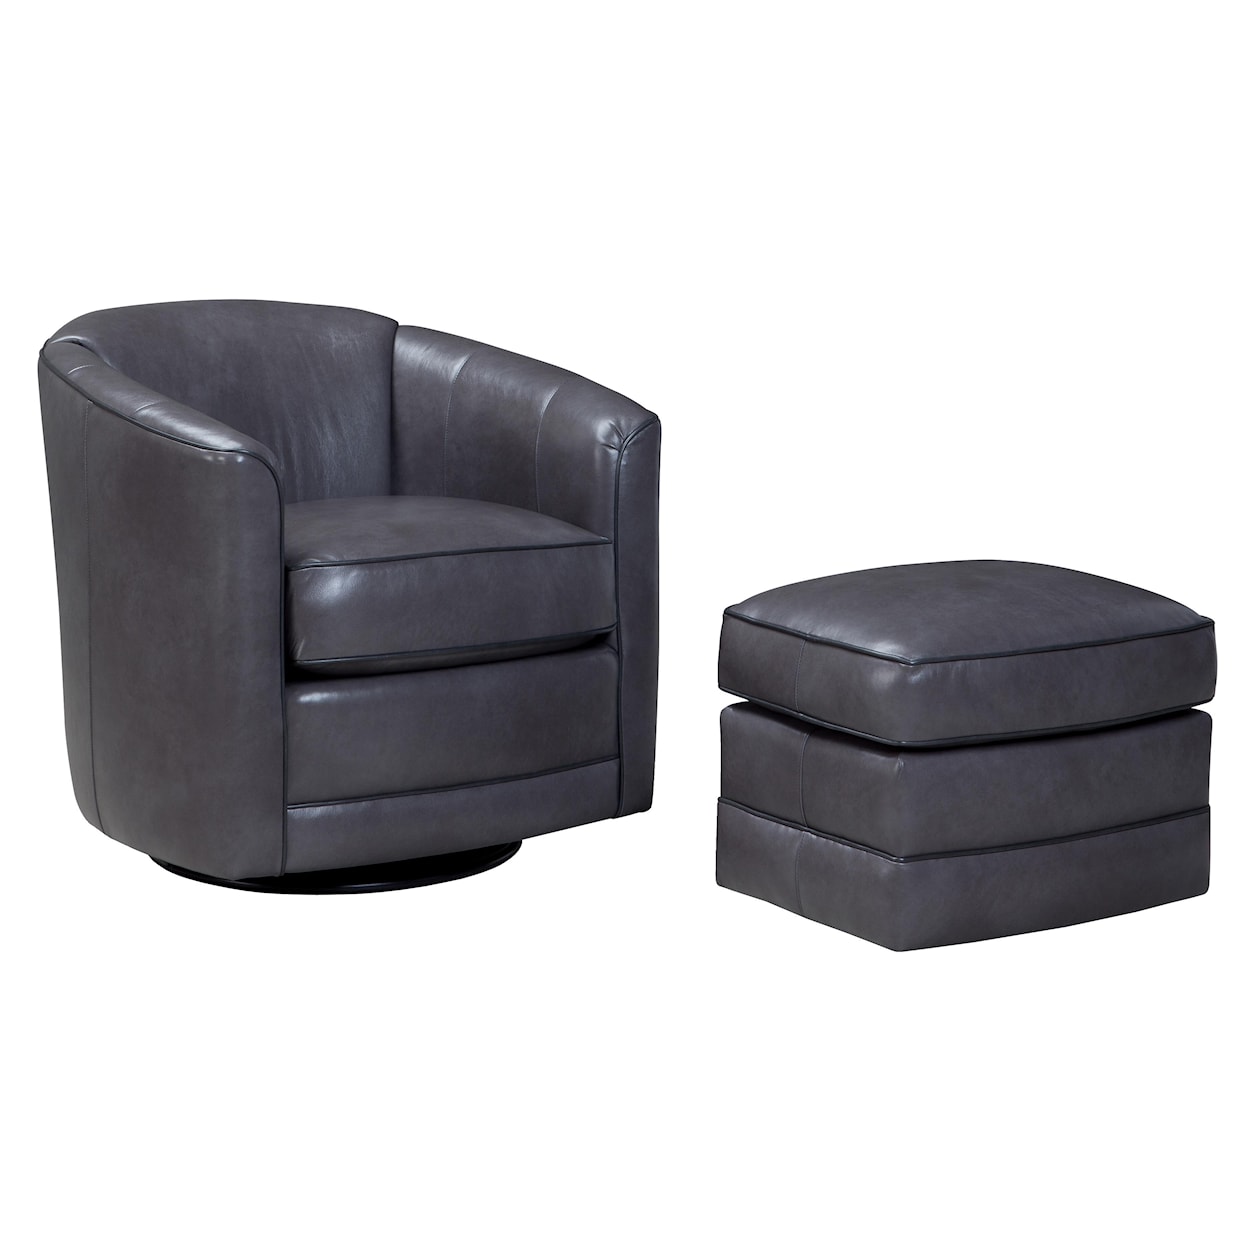 Smith Brothers 506 Swivel Chair and Ottoman Set